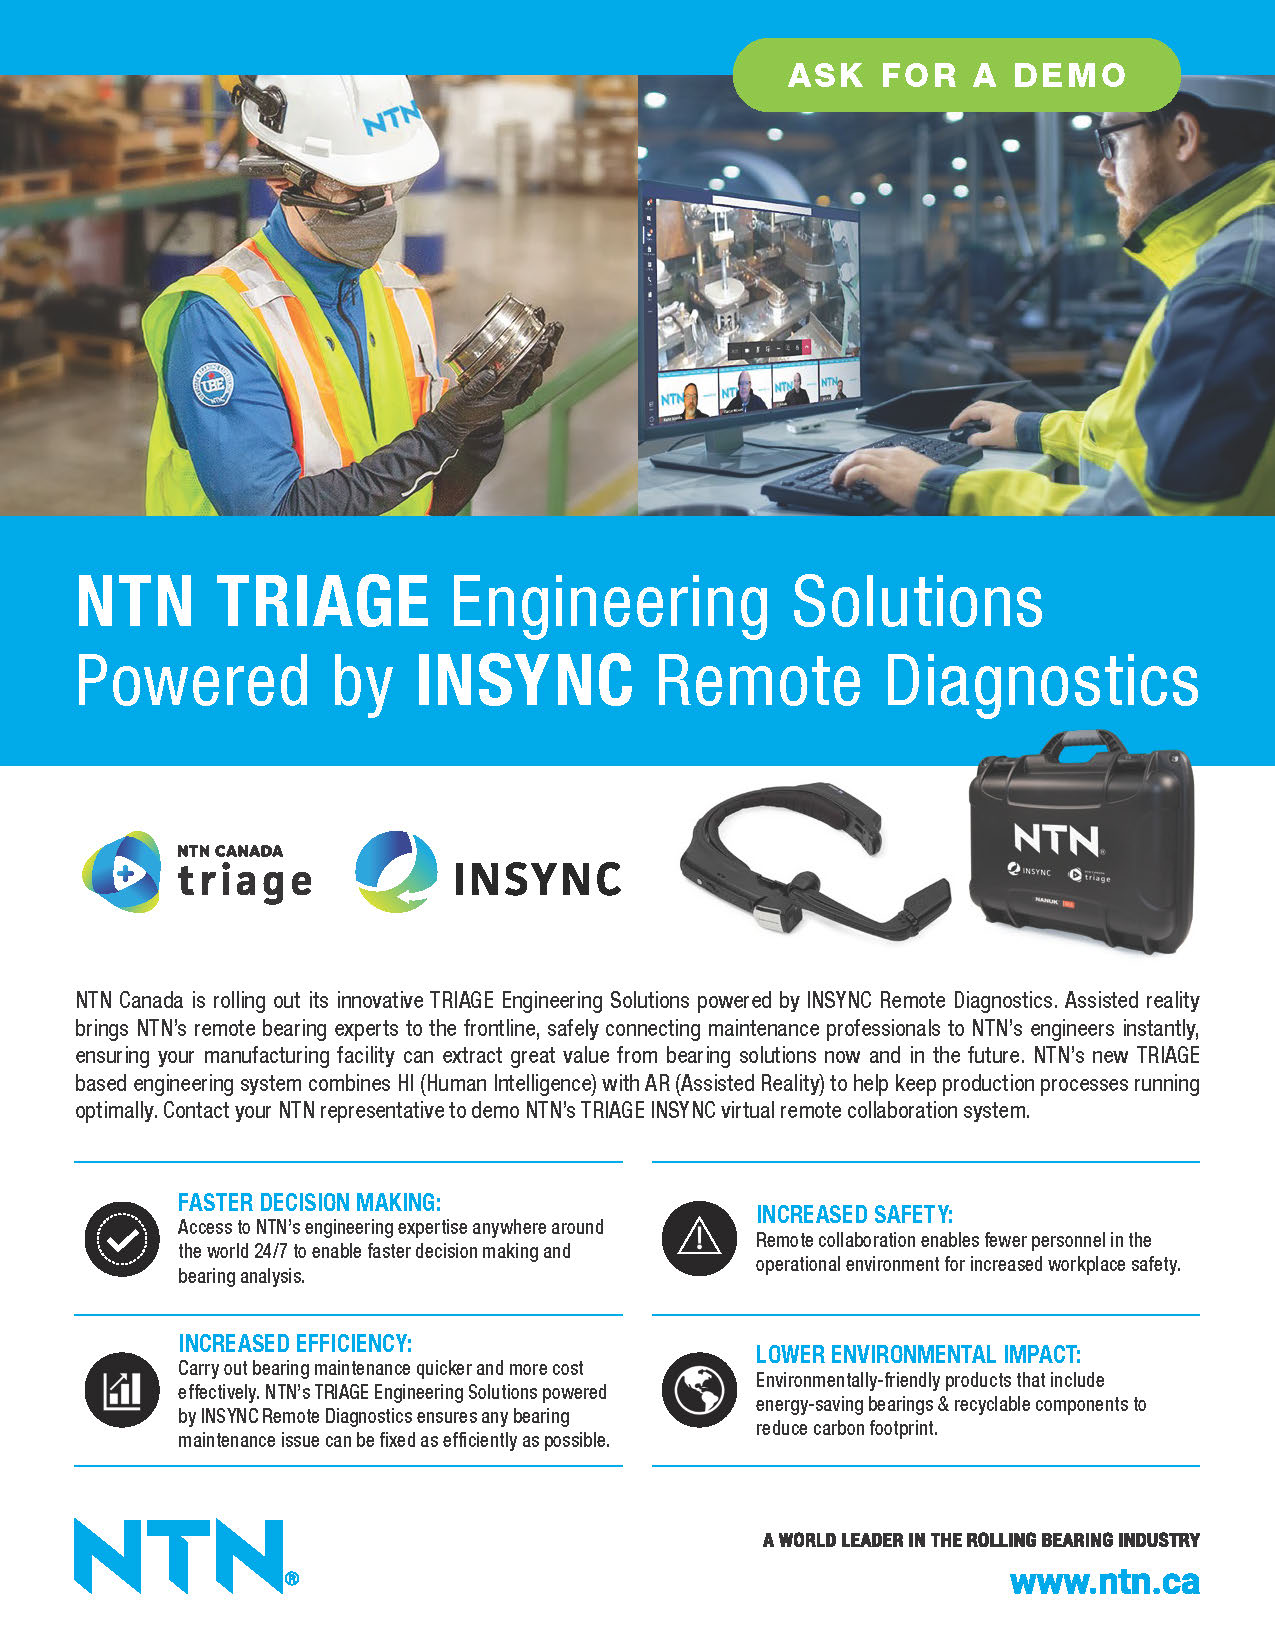 triage engineering solutions powered by insync en